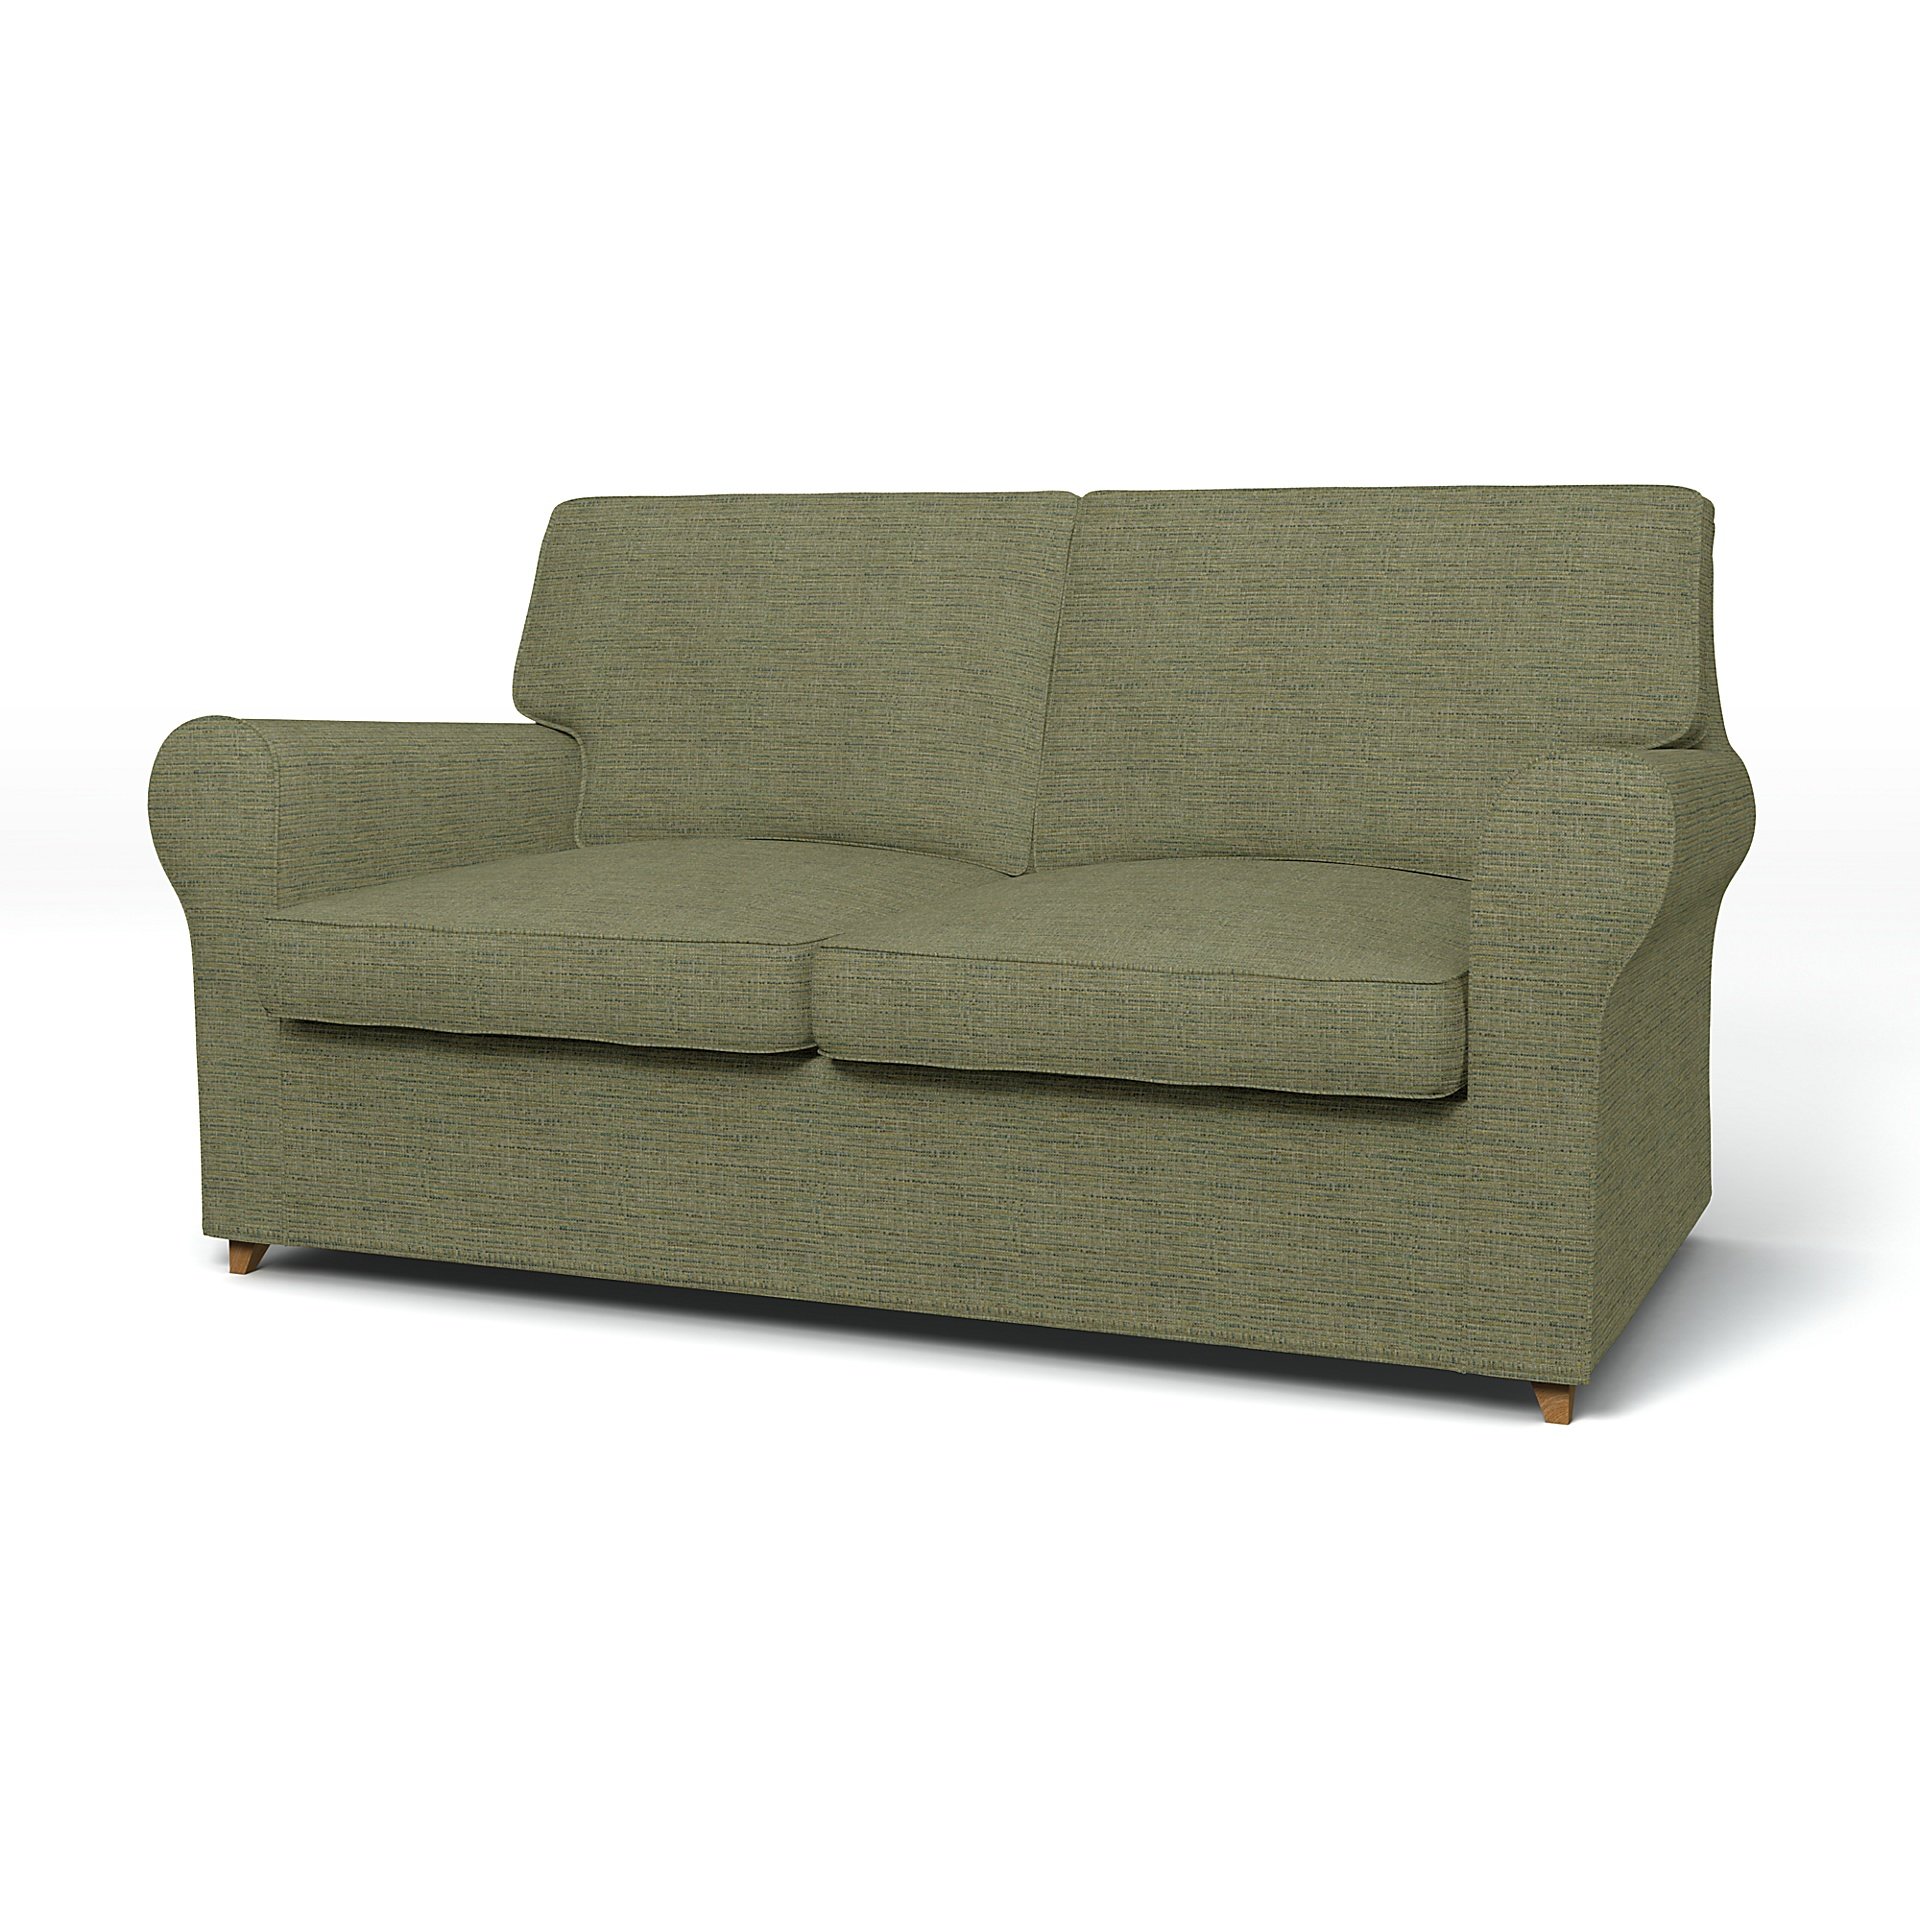 IKEA - Angby 2 Seater Sofa Cover, Meadow Green, Boucle & Texture - Bemz